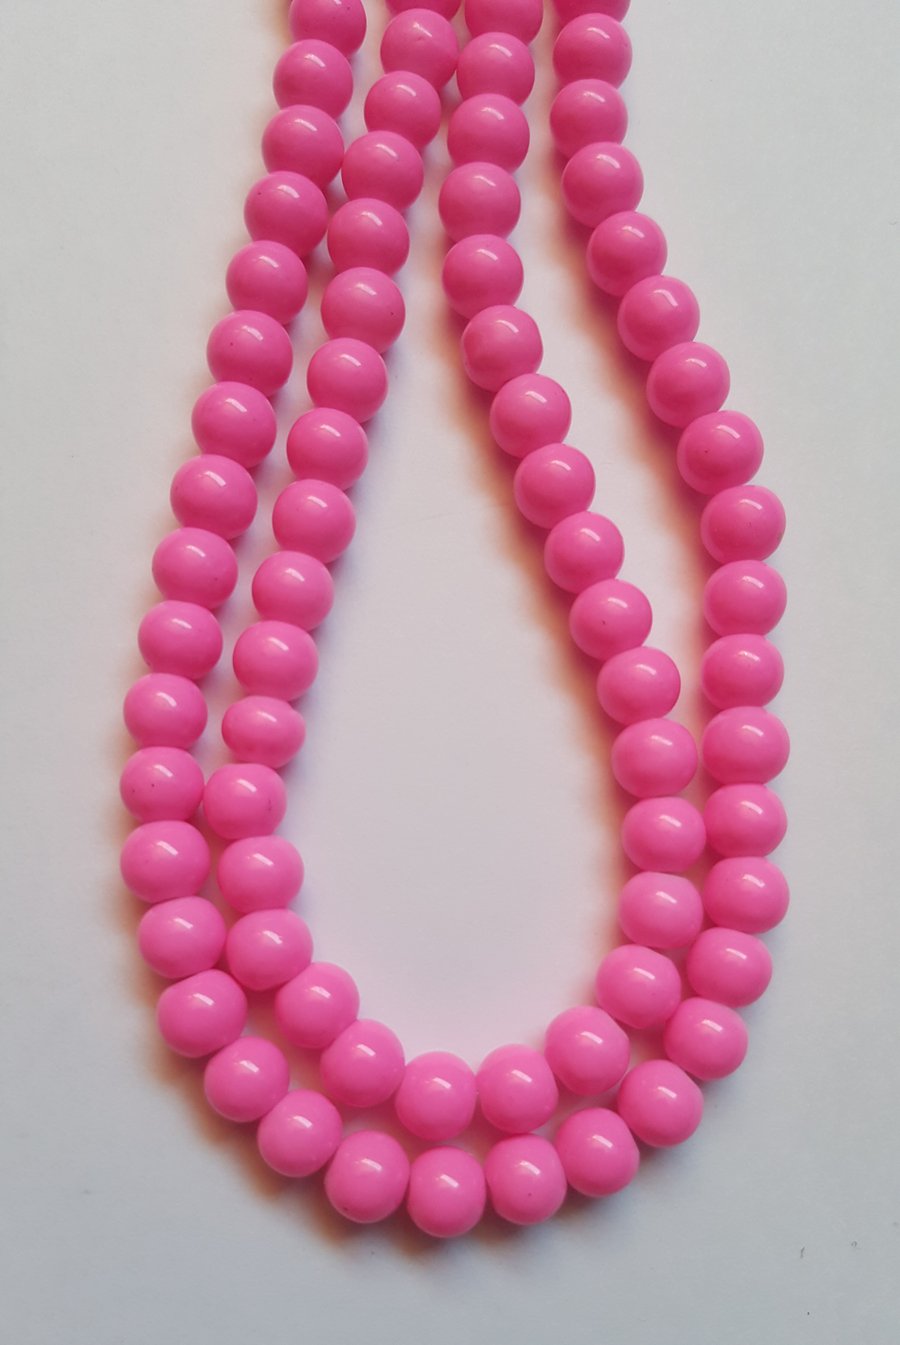 50 x Baked Glass Beads - Round - 6mm - Bright Pink 